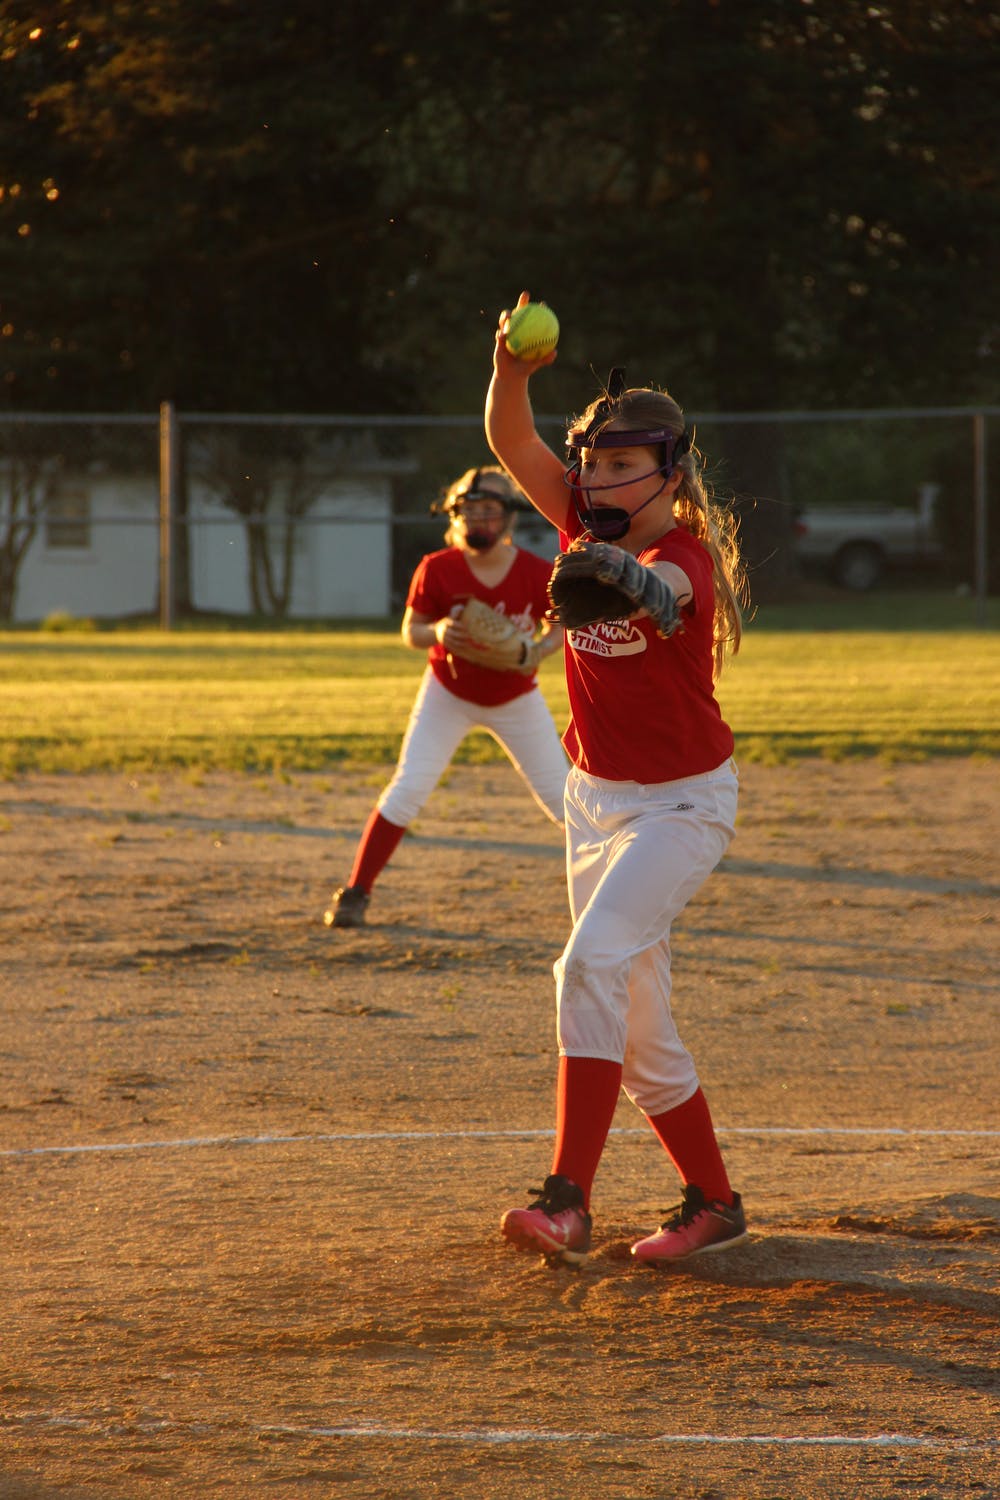 Softball Face Masks: What are They and are They Necessary? | SportRx